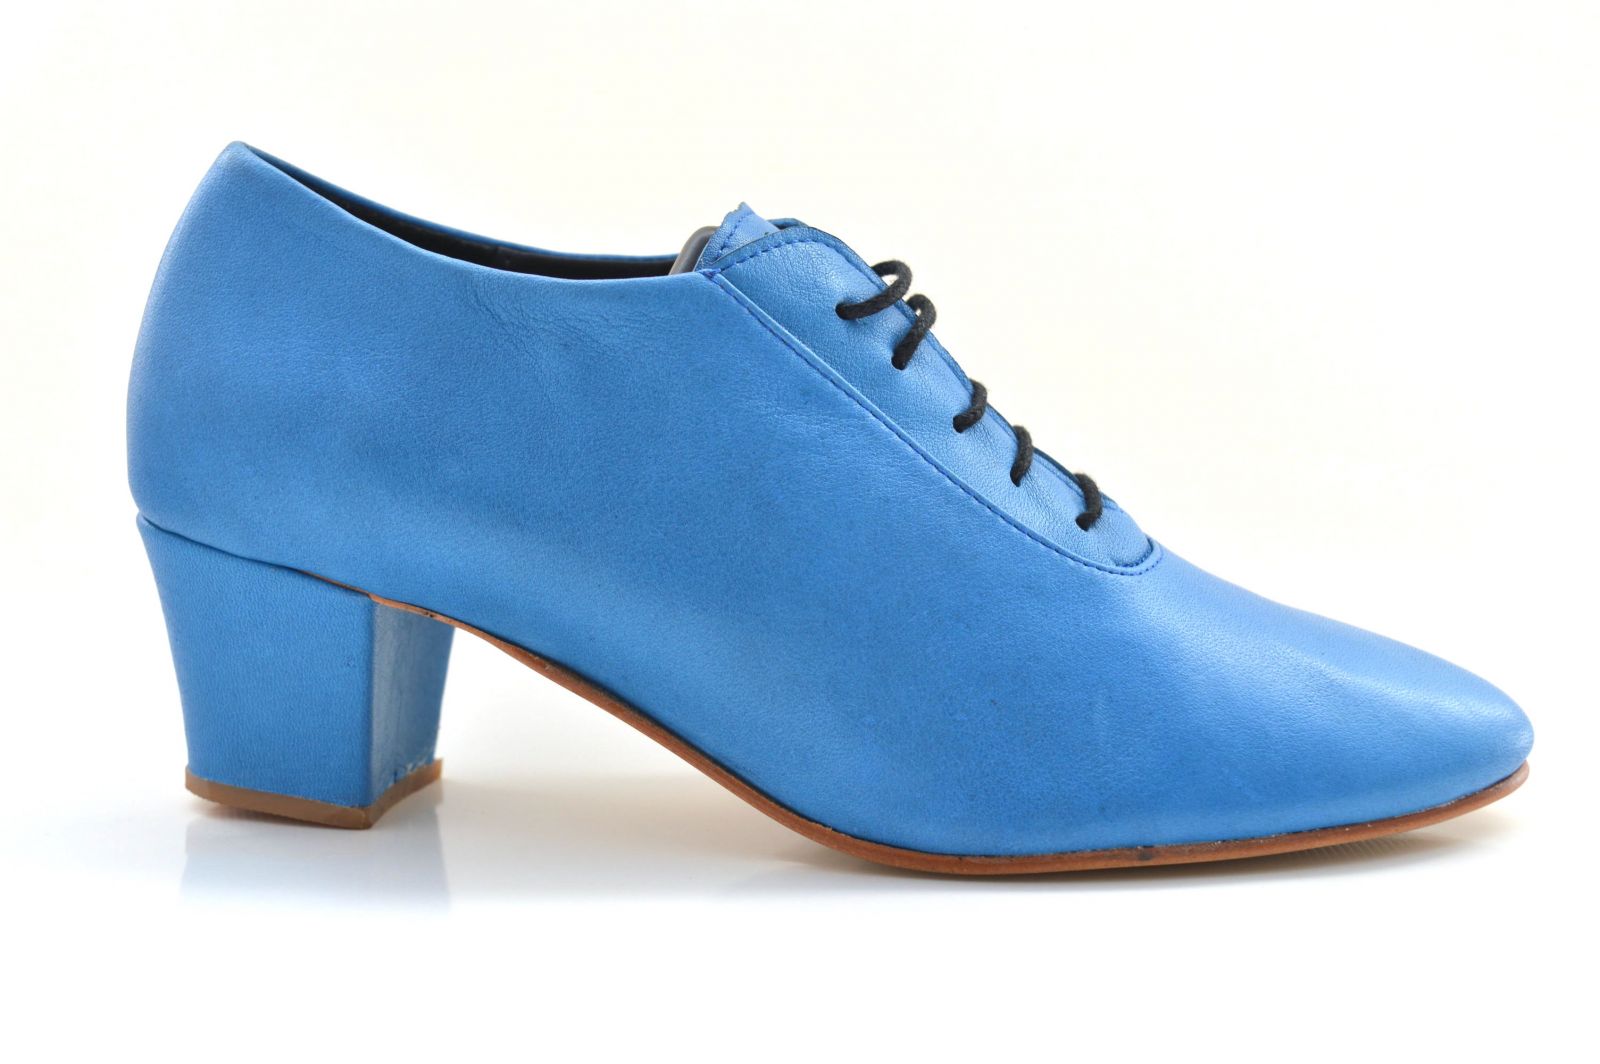 Women's Argentine Tango Shoe, oxford style, by very soft blue leather